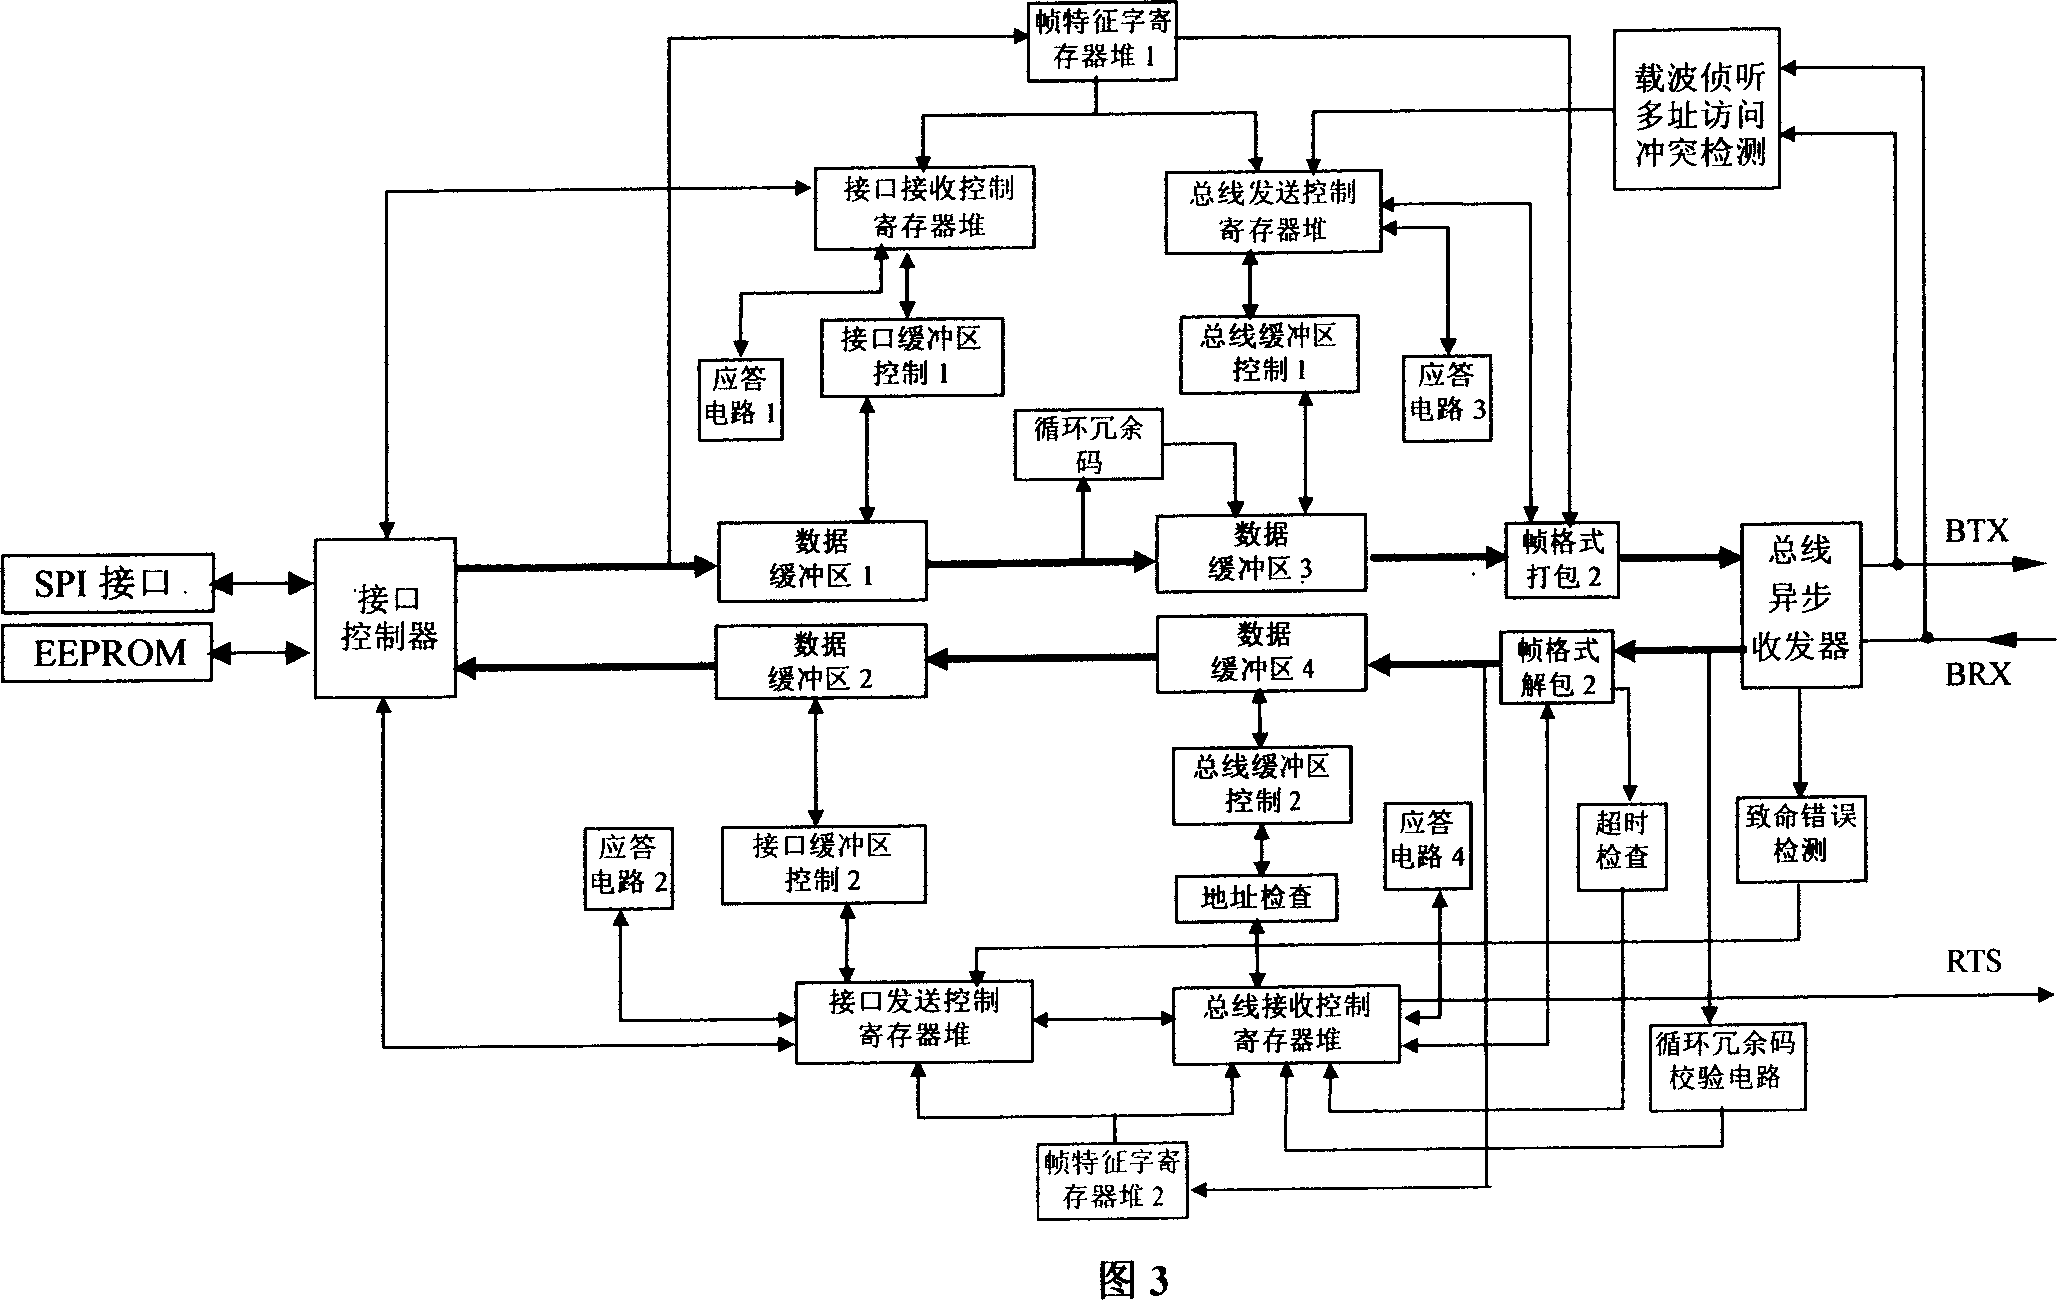 A readable-writable communication controller of serial interface bus with SPI interface